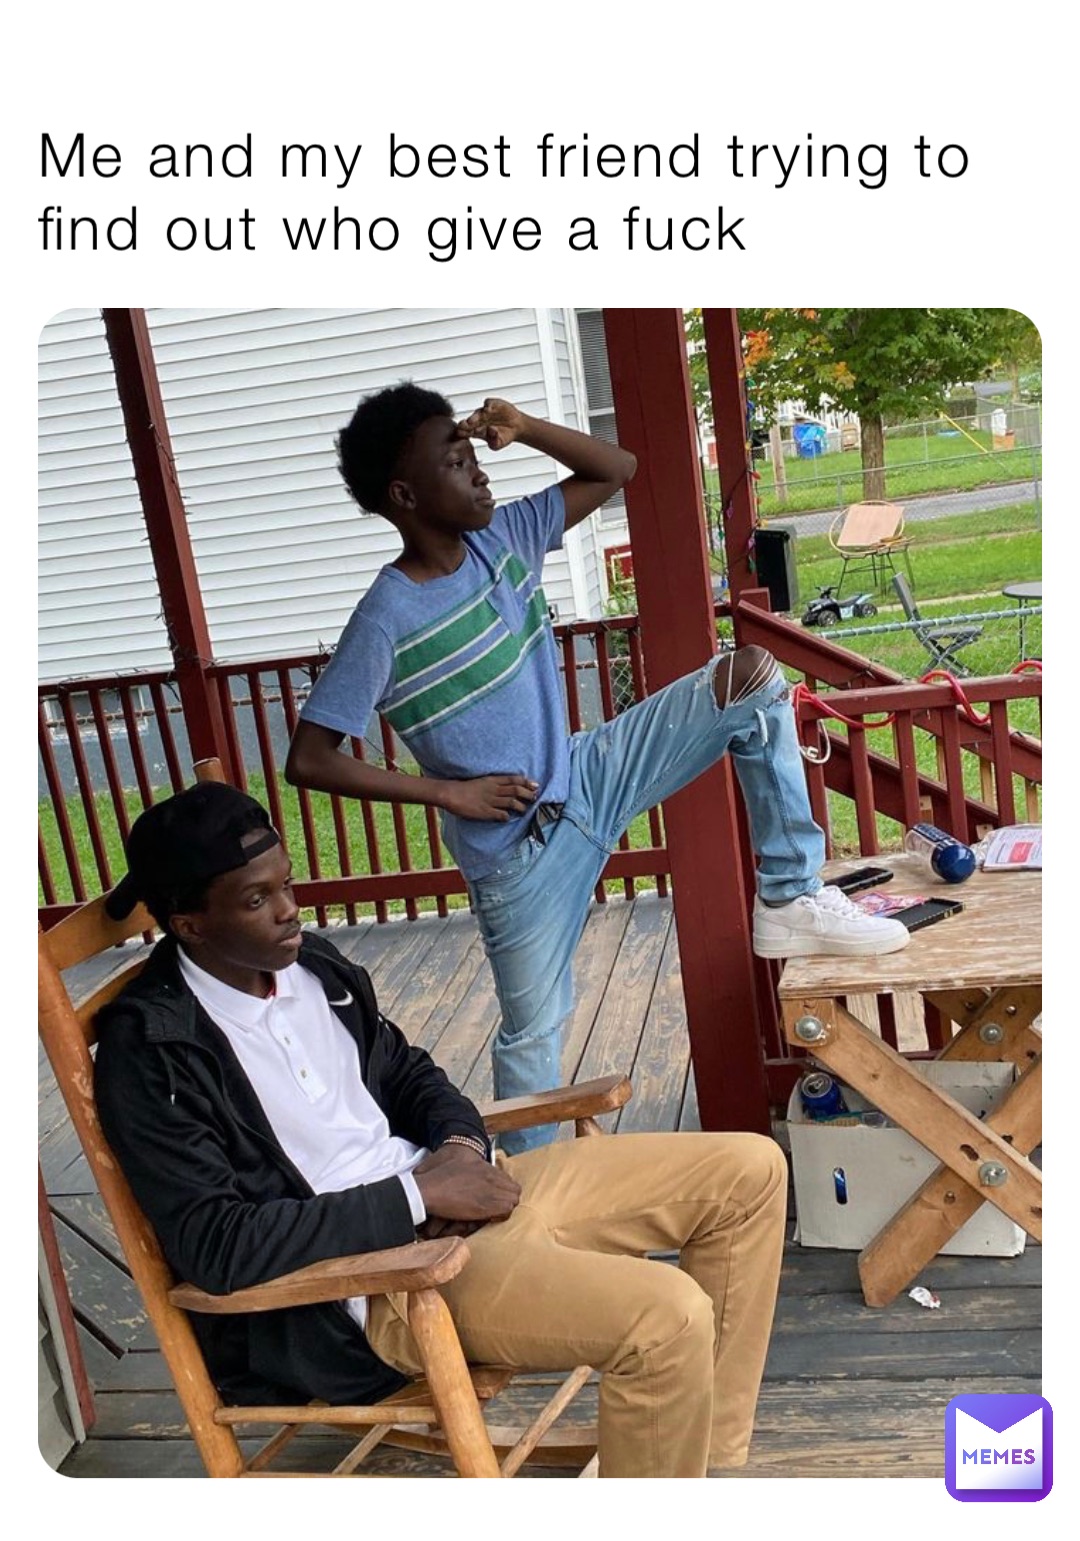 Me and my best friend trying to find out who give a fuck